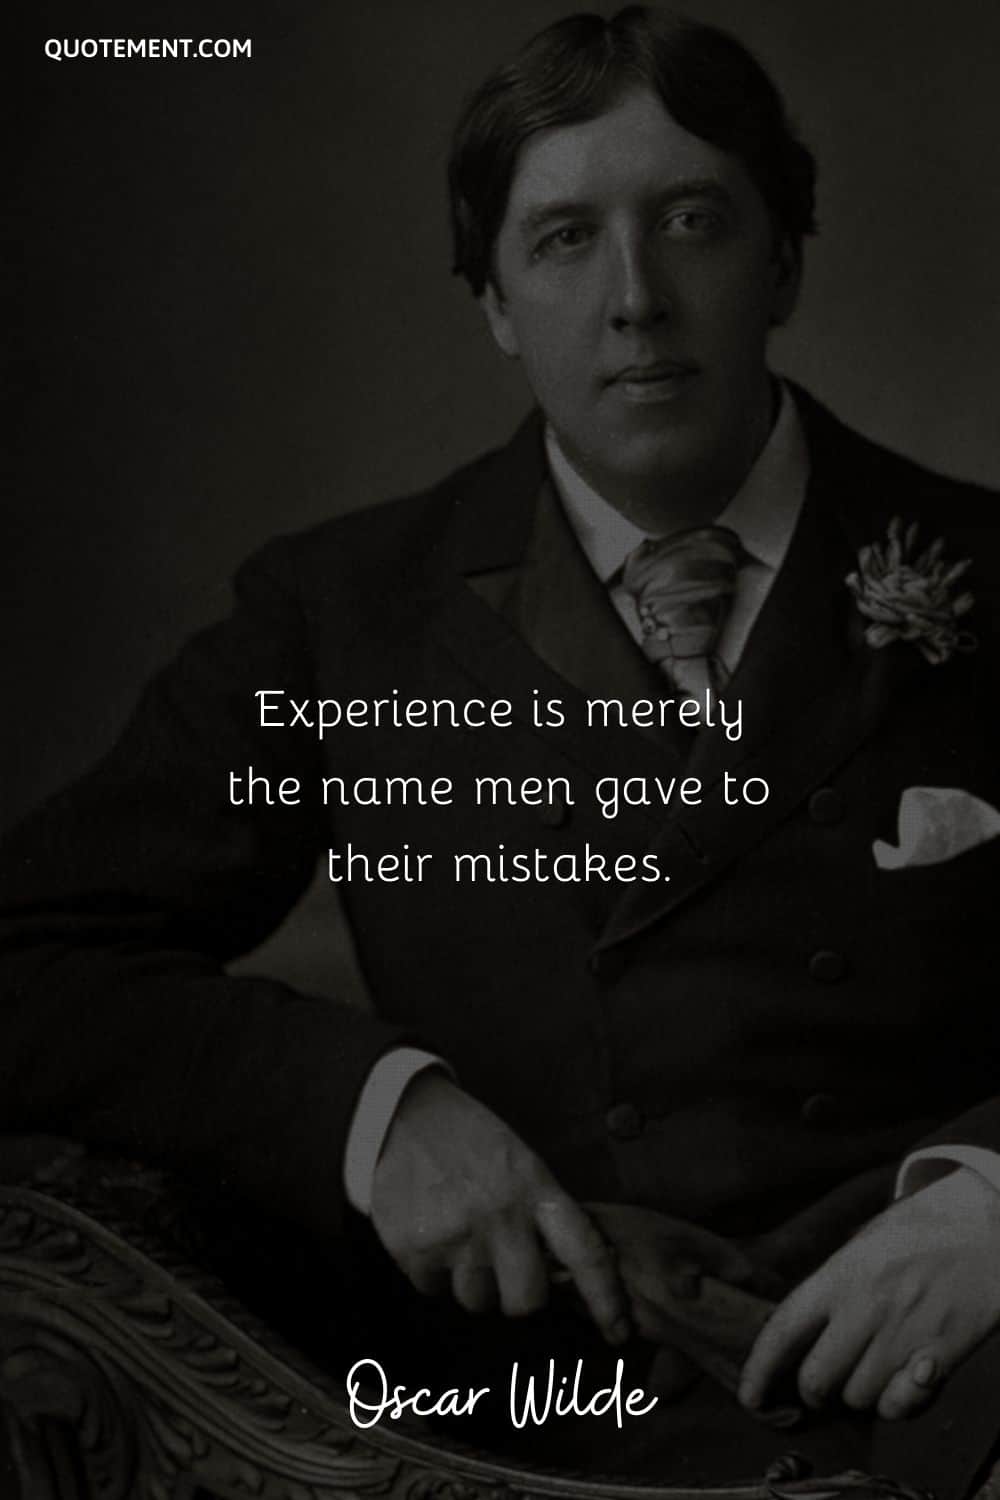 Oscar Wilde life quote and his portrait.